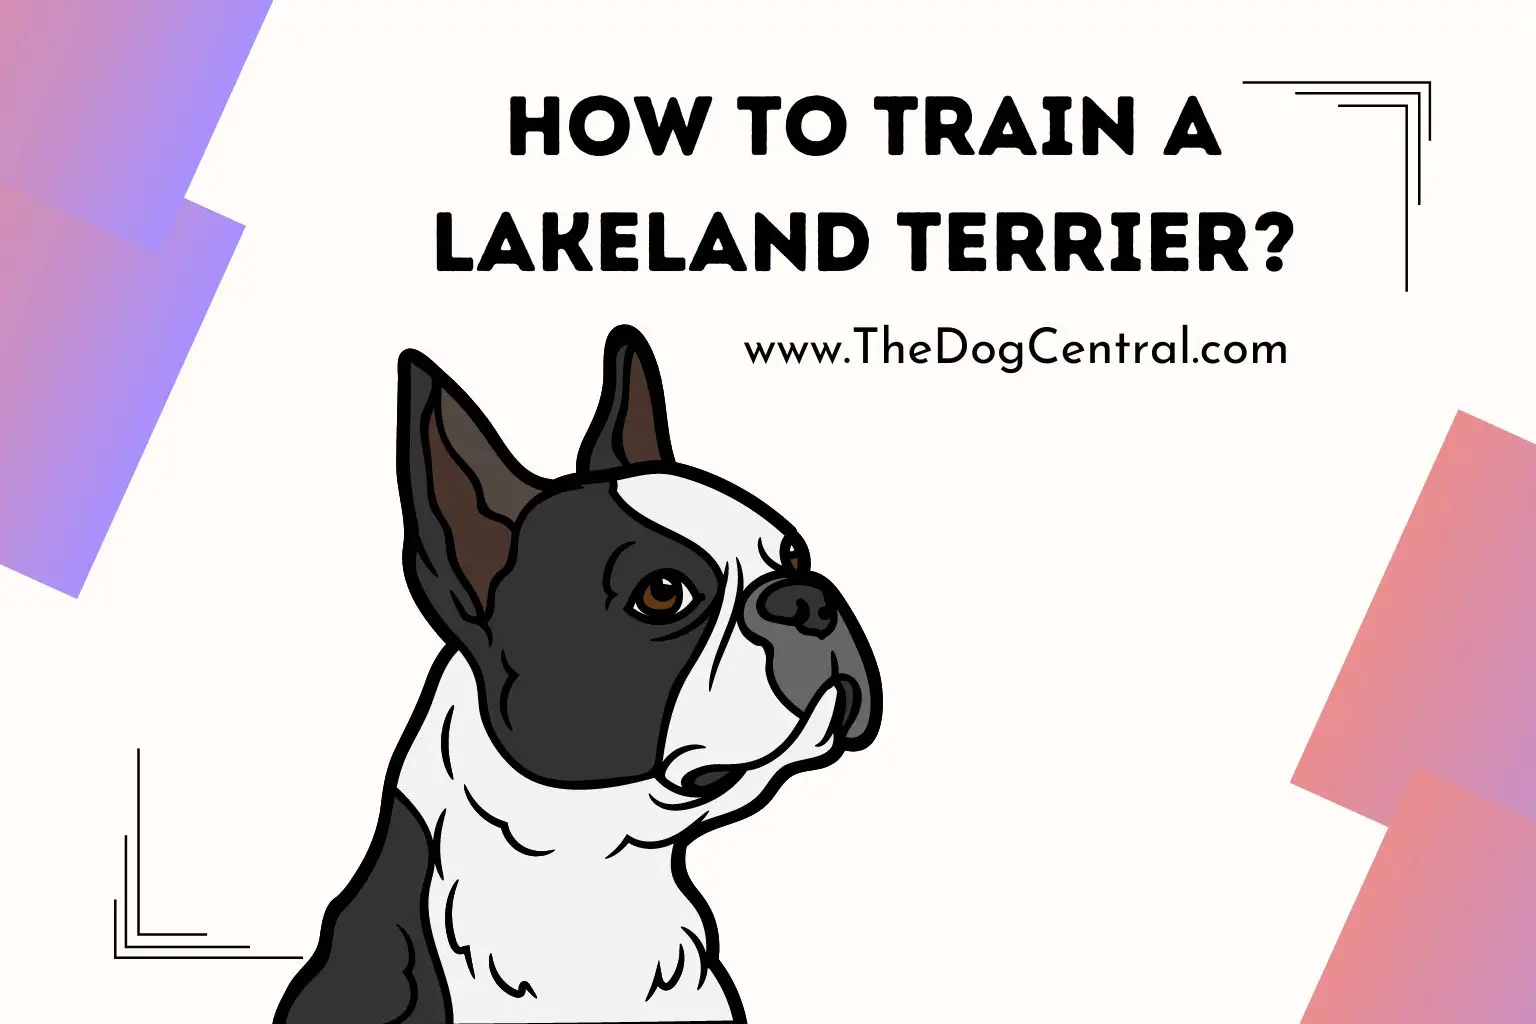 How to Train a Lakeland Terrier